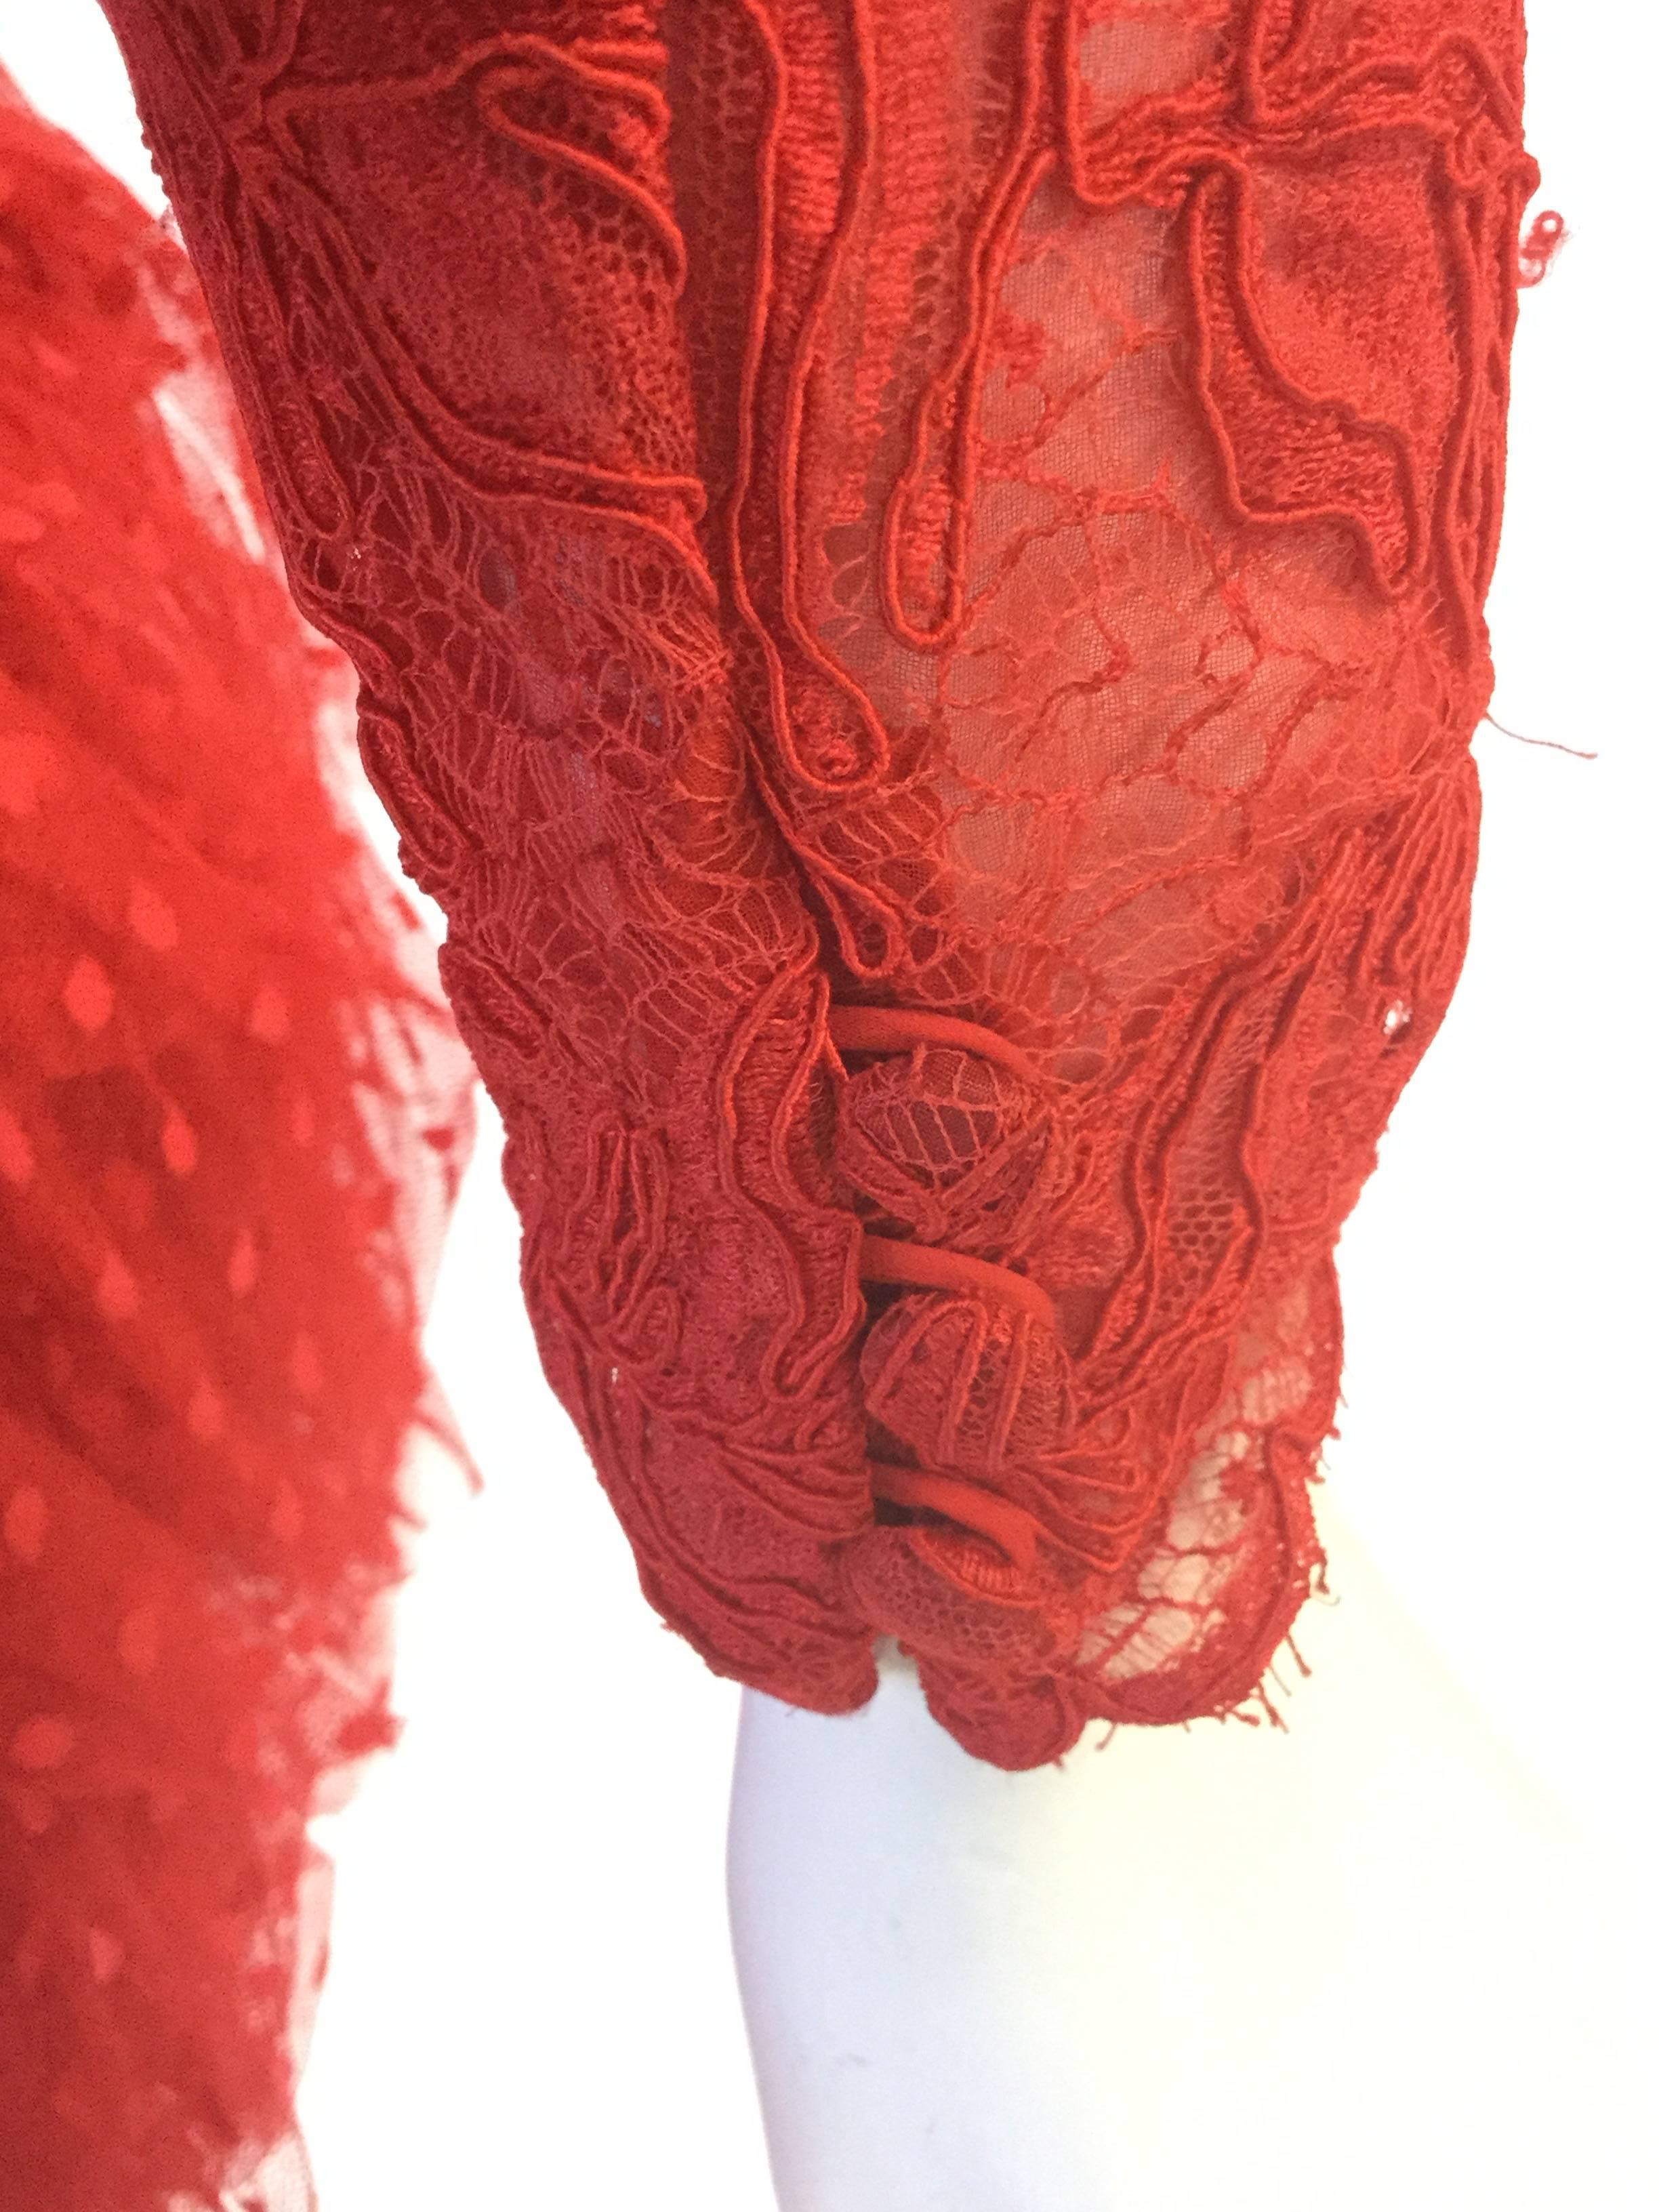 Women's 1980s Bill Blass Red Lace and Polkadot Tulle Cocktail Evening Dress